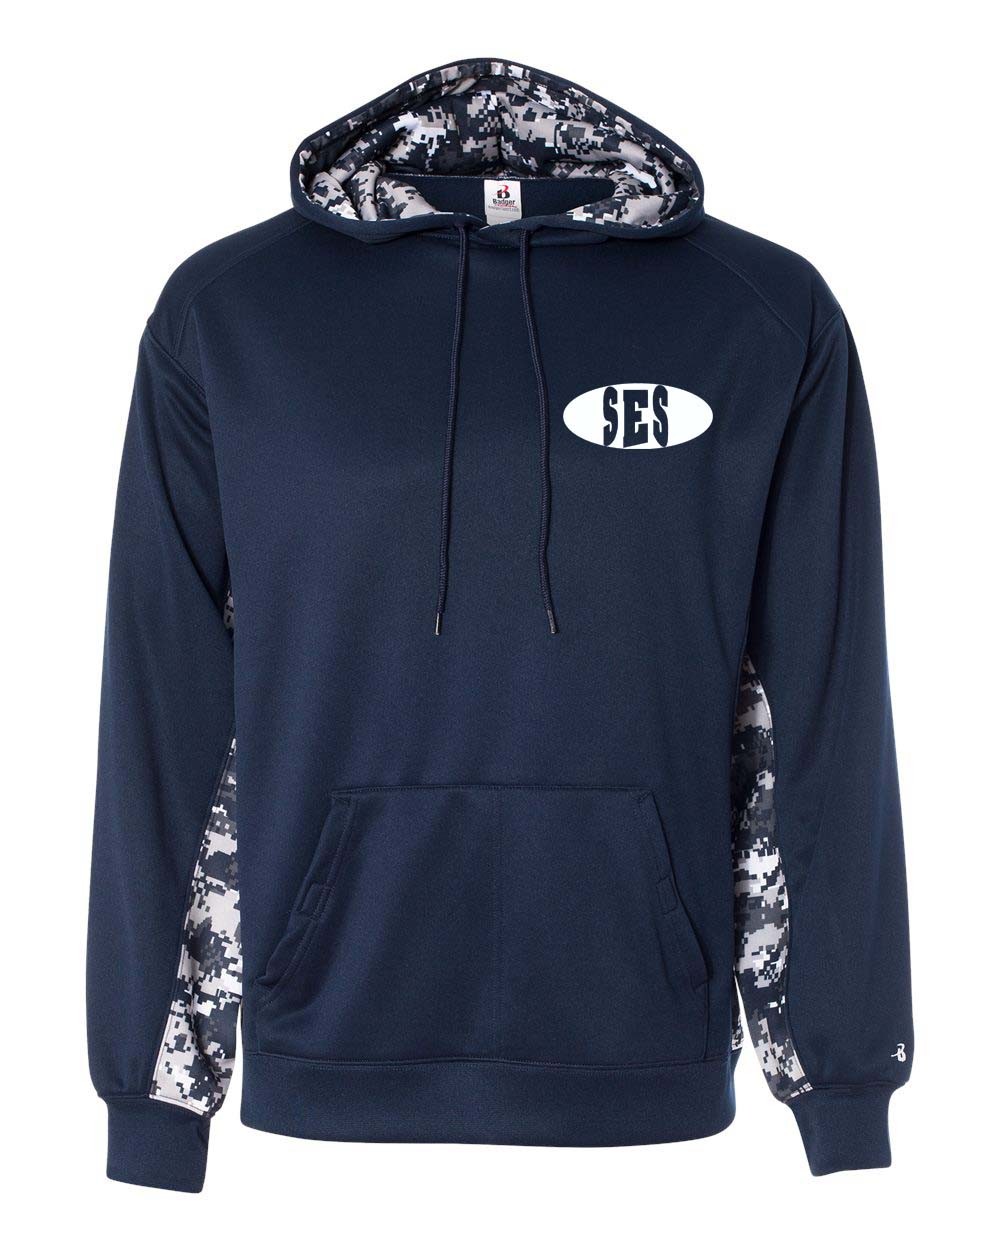 SES Spirit Digital Color Block Hoodie w/ White Logo - Please Allow 2-3 Weeks for Delivery